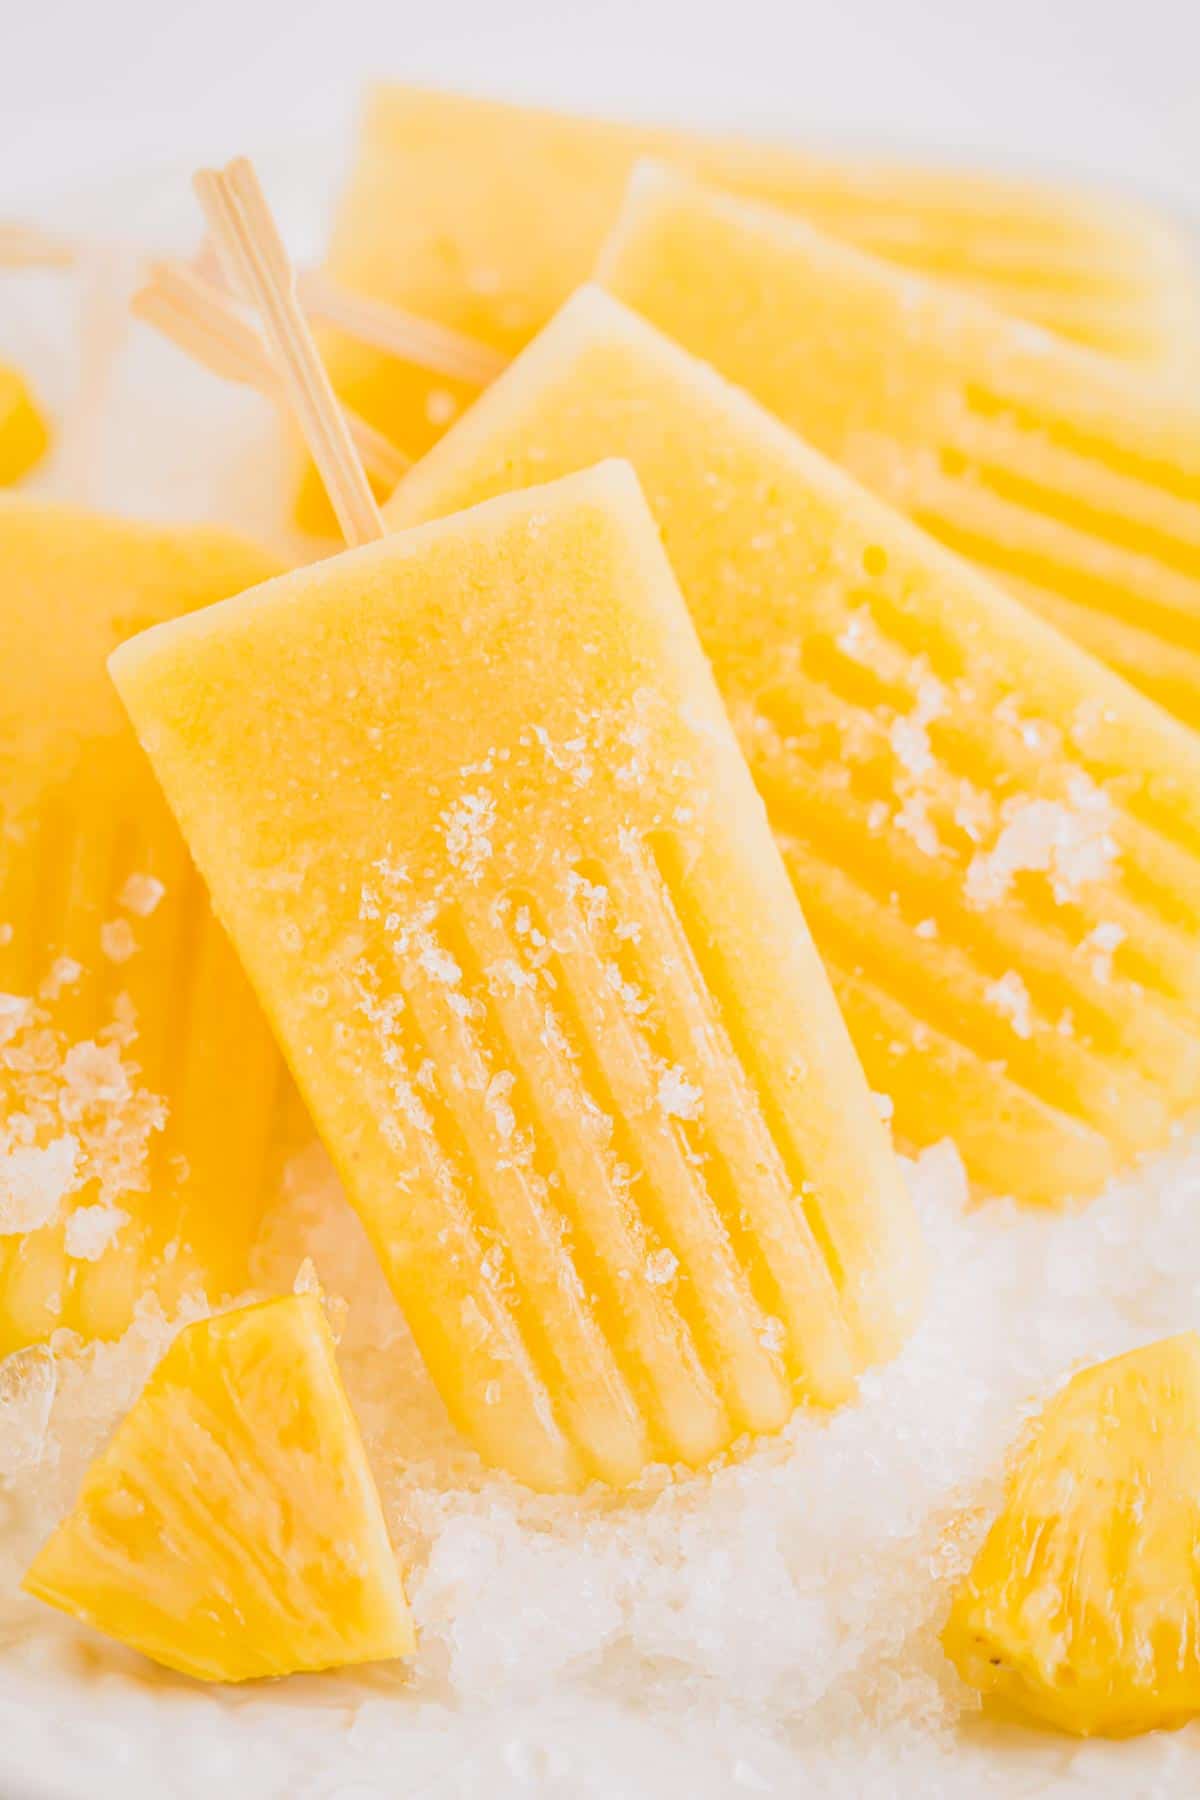 Handful of pineapple popsicles on crushed ice.